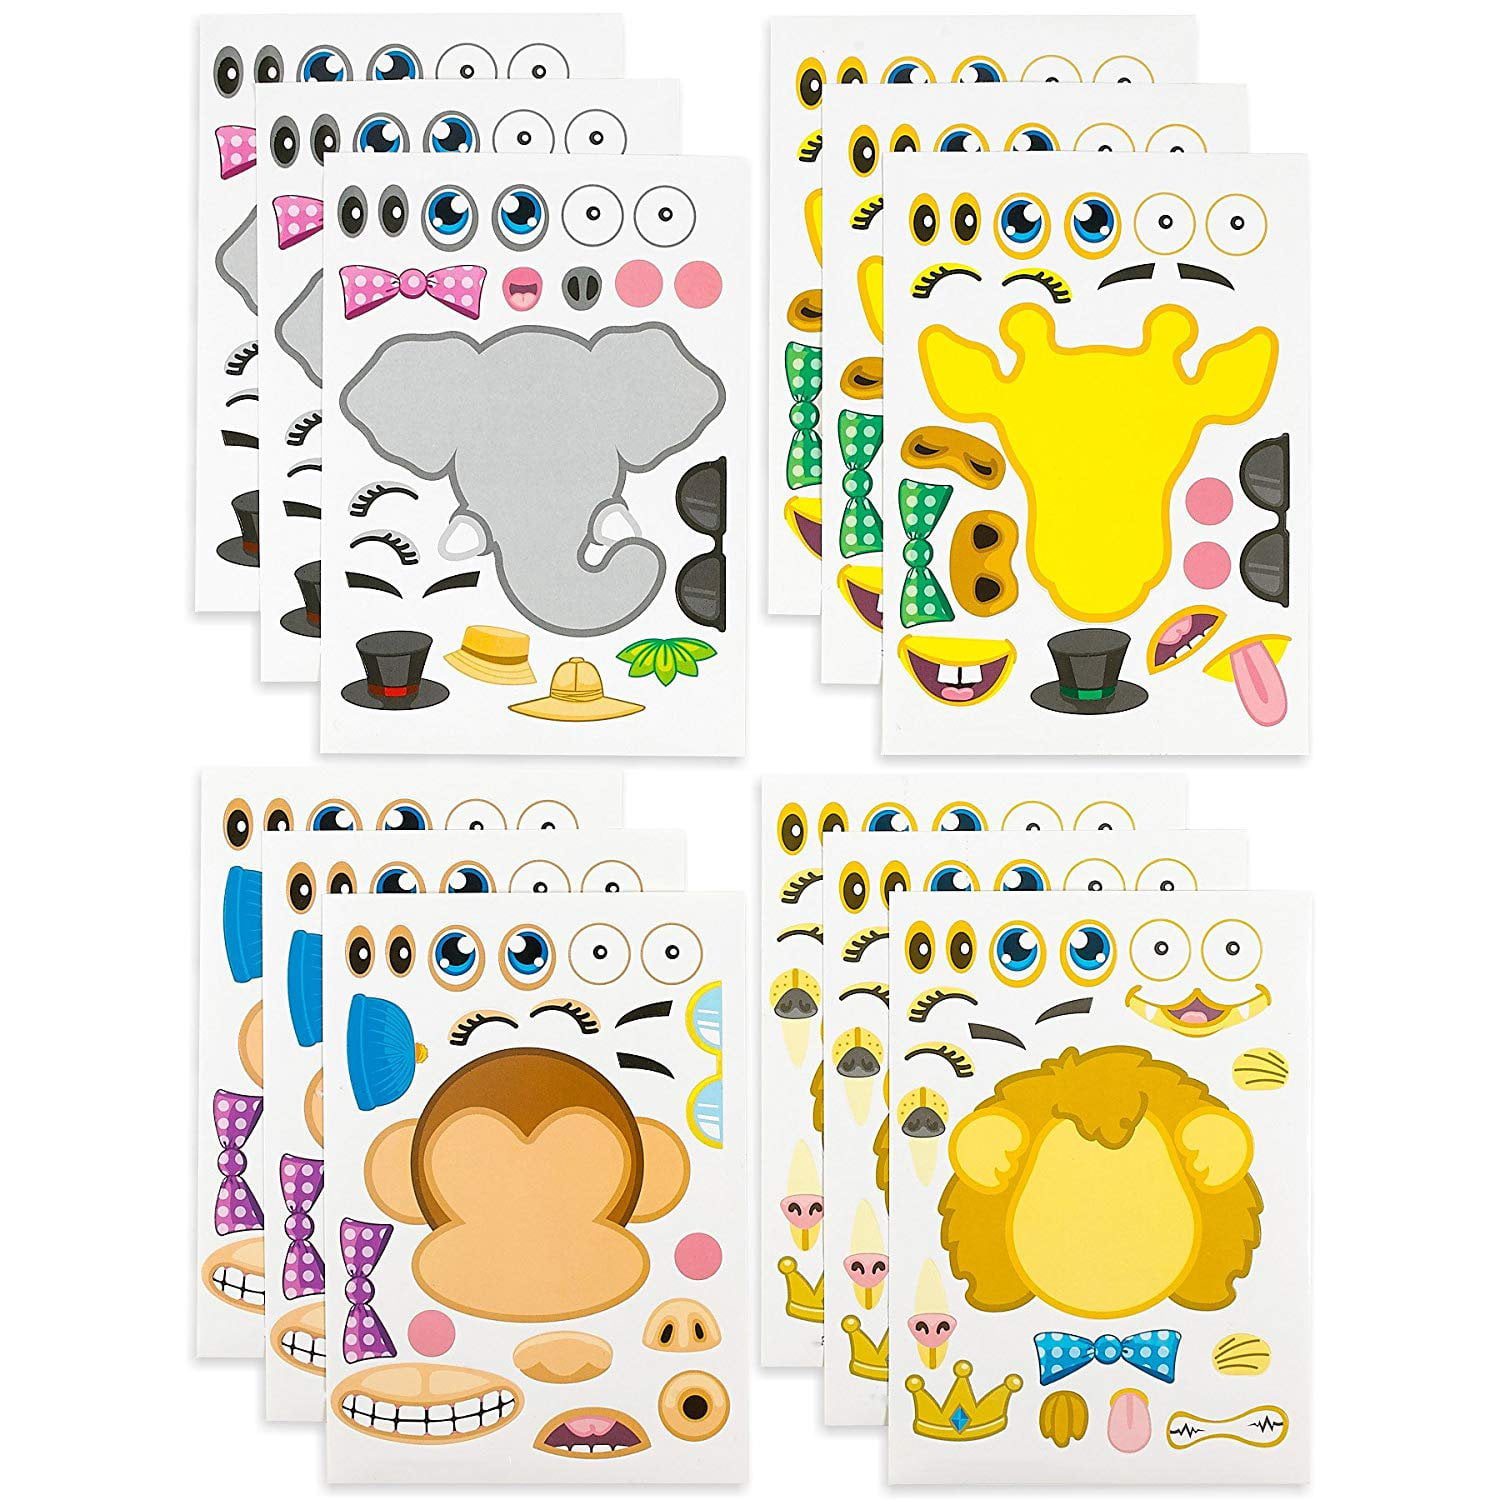 12 Circus Themed  Sticker Sheets for Kids CraftsChildrens Craft Stickers 